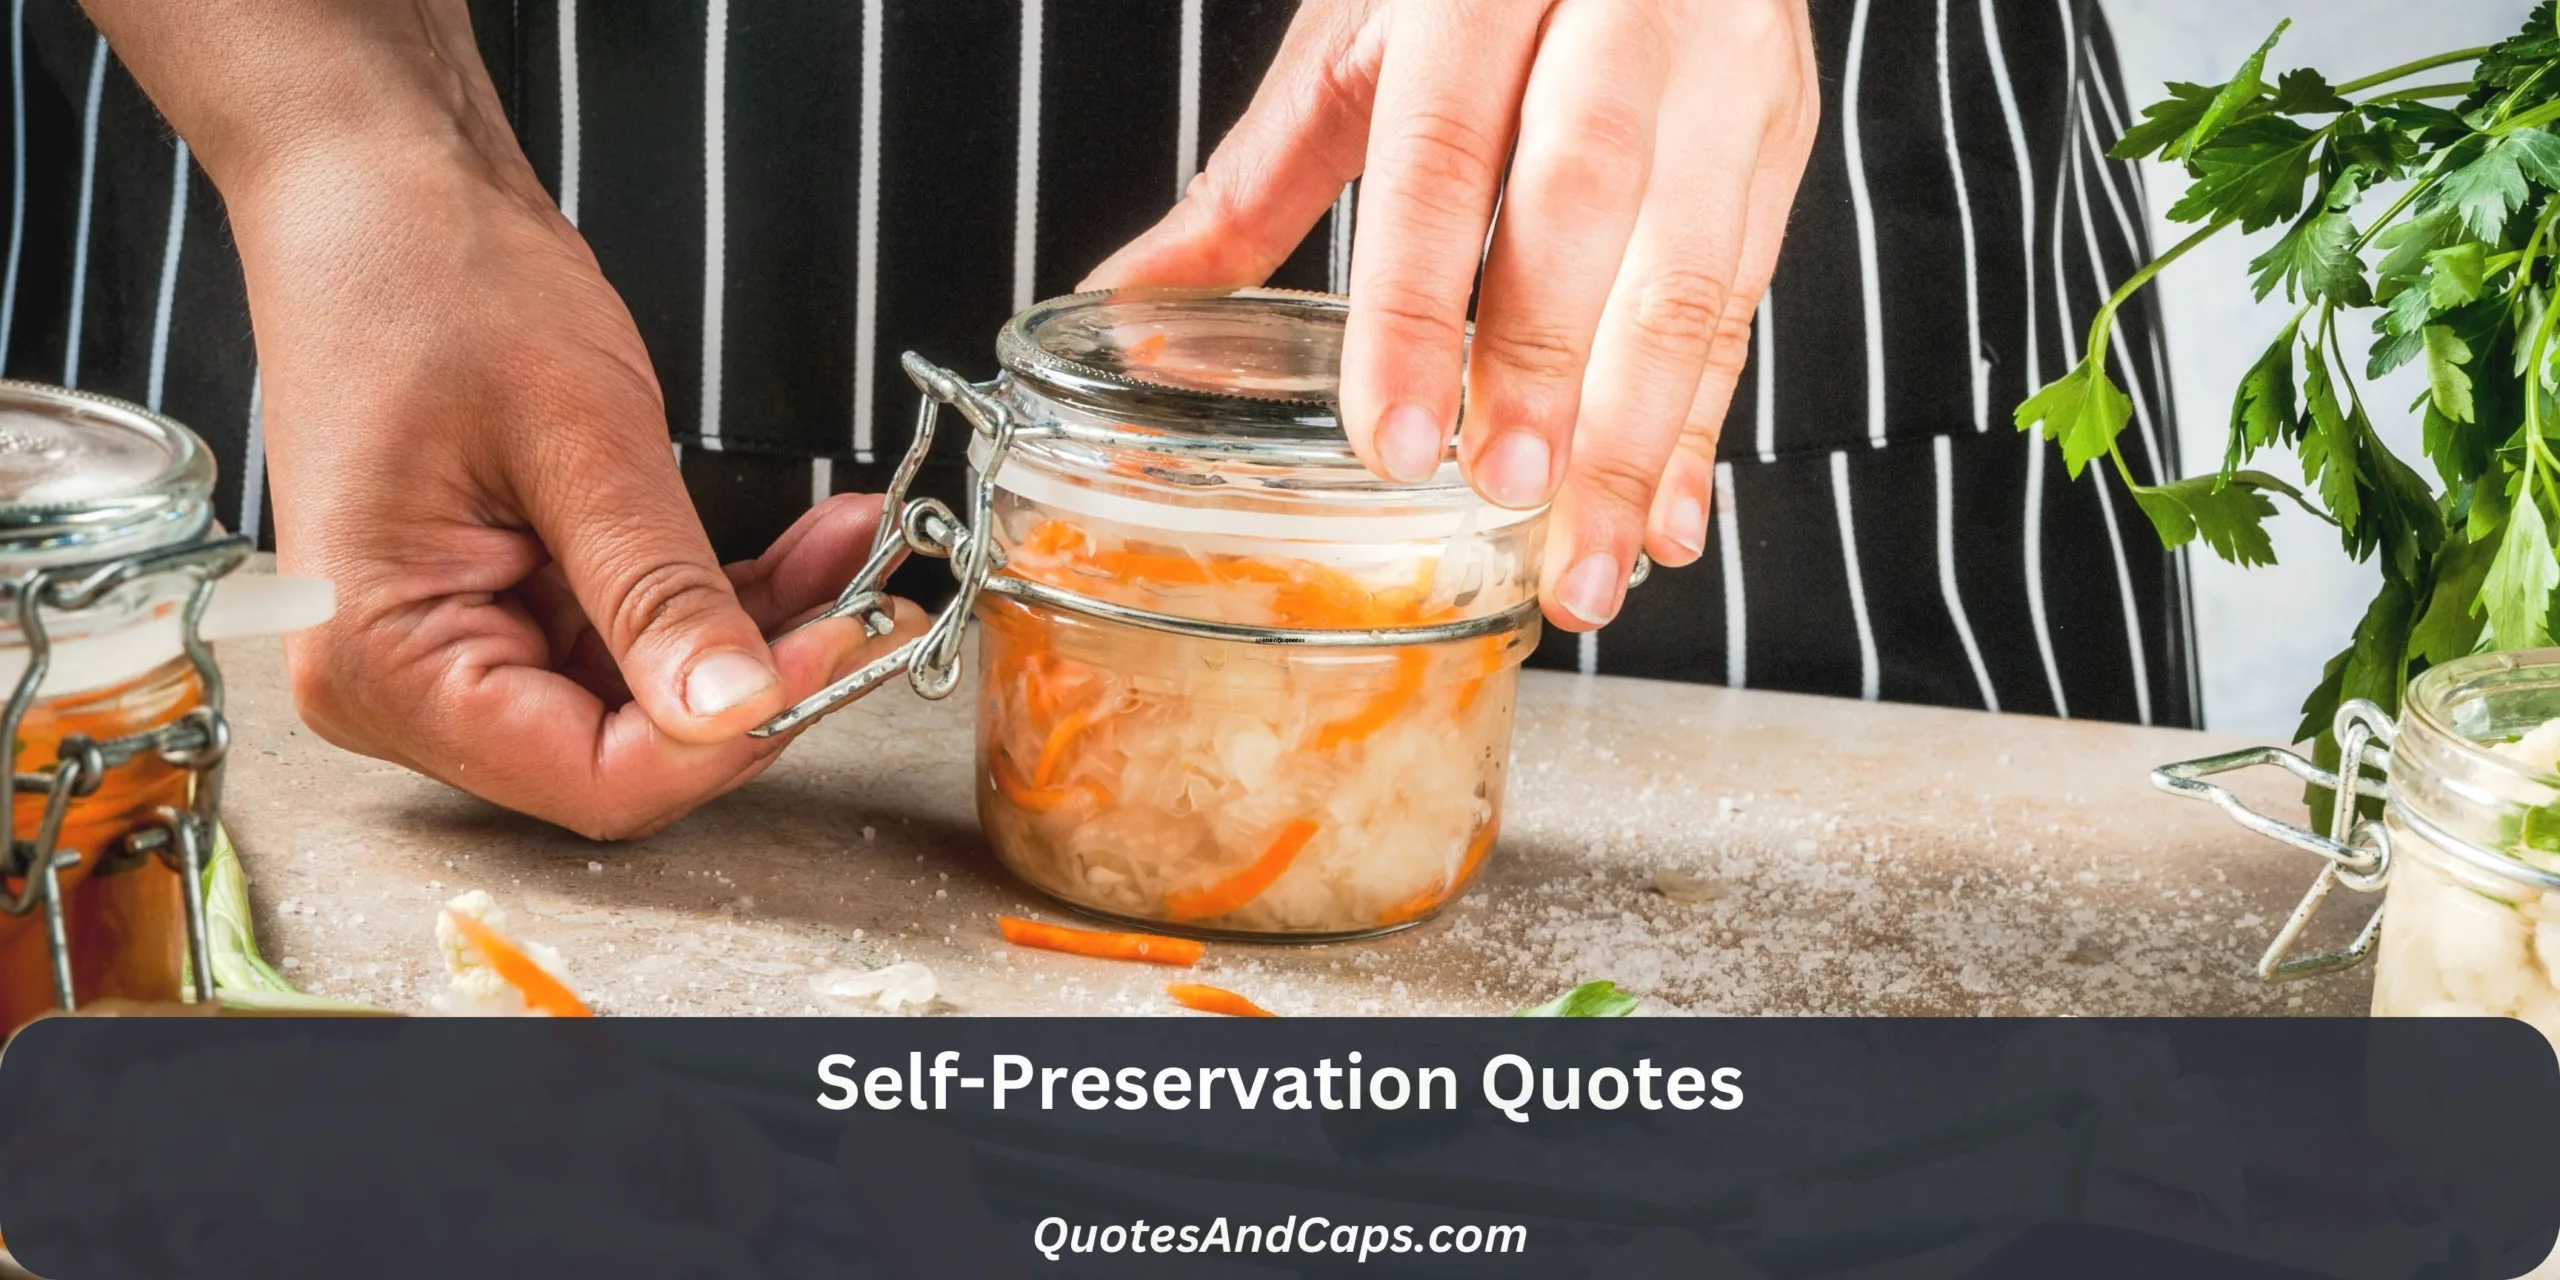 Self-Preservation Quotes